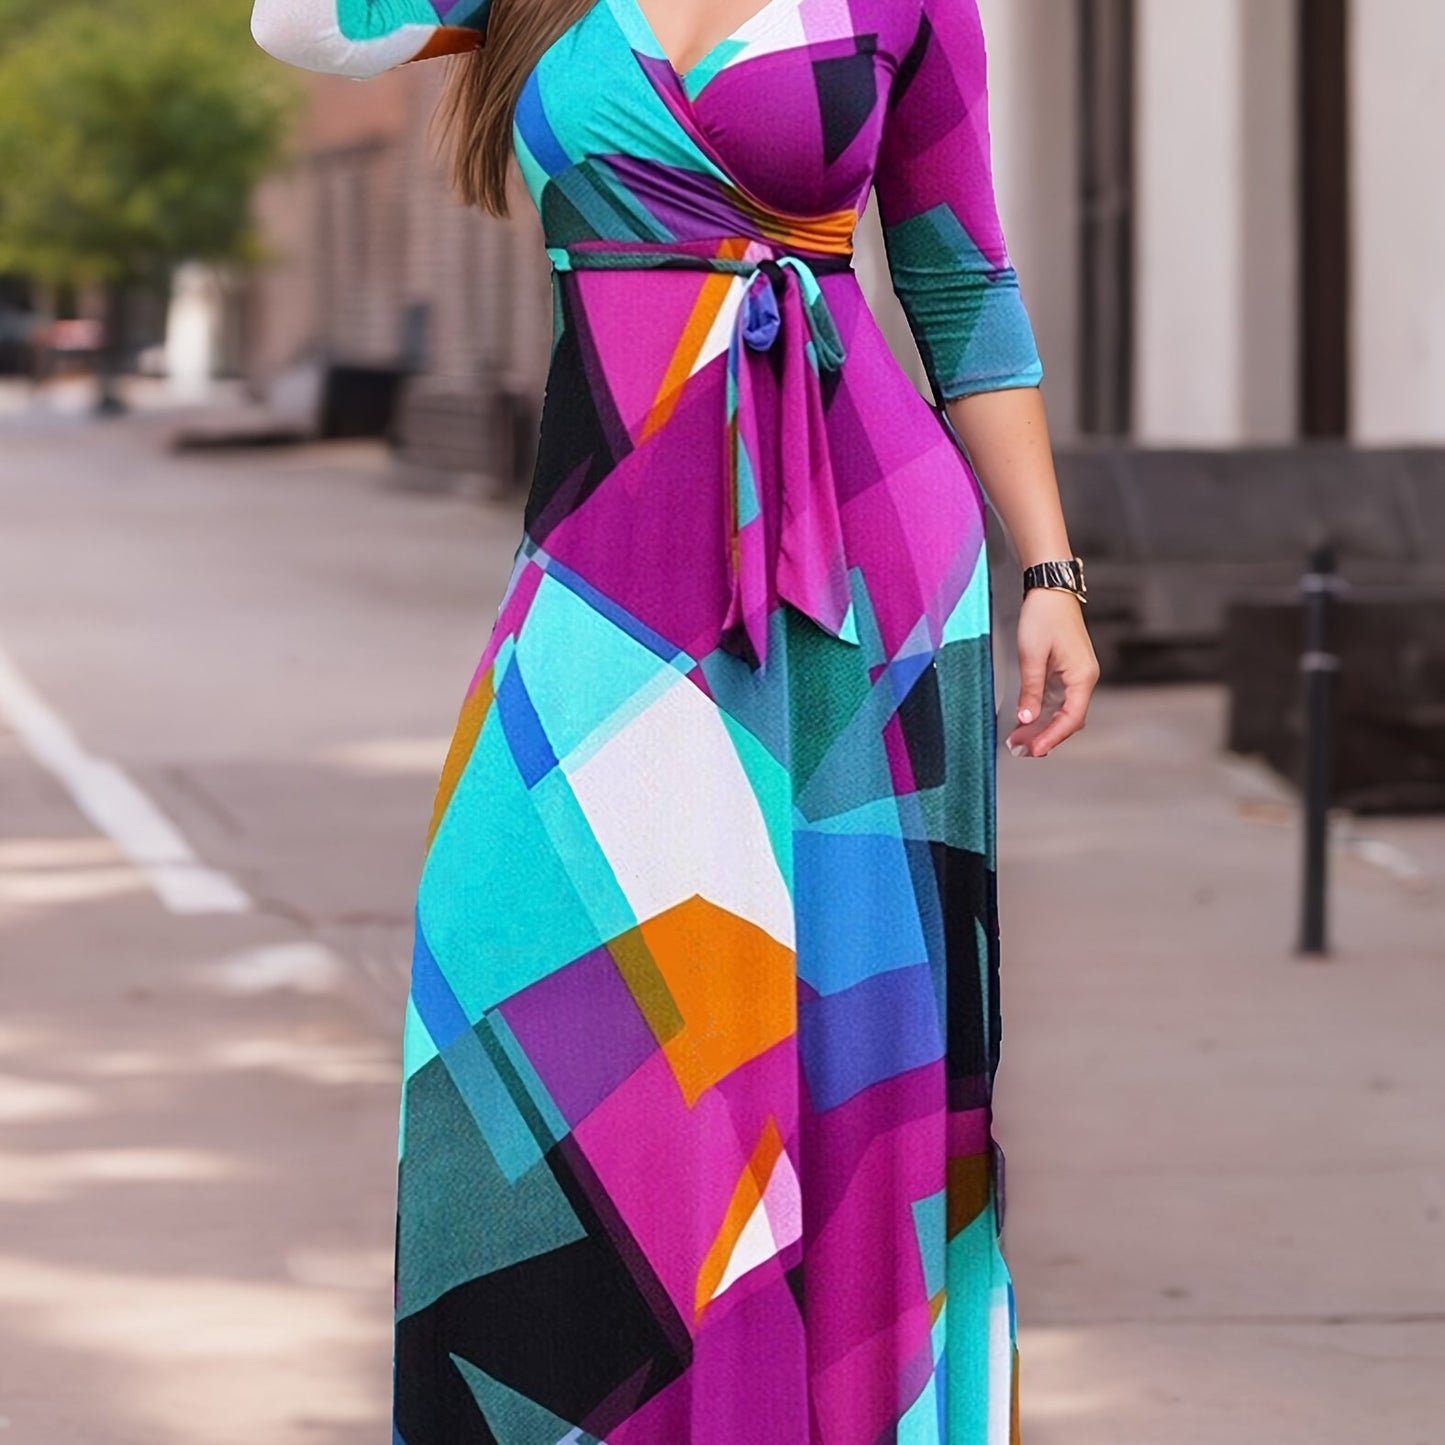 Charming Color Block Surplice Dress with Belt - Flattering Neckline & 3/4 Sleeves - Ideal for Spring to Summer - Womens Fashion Essential